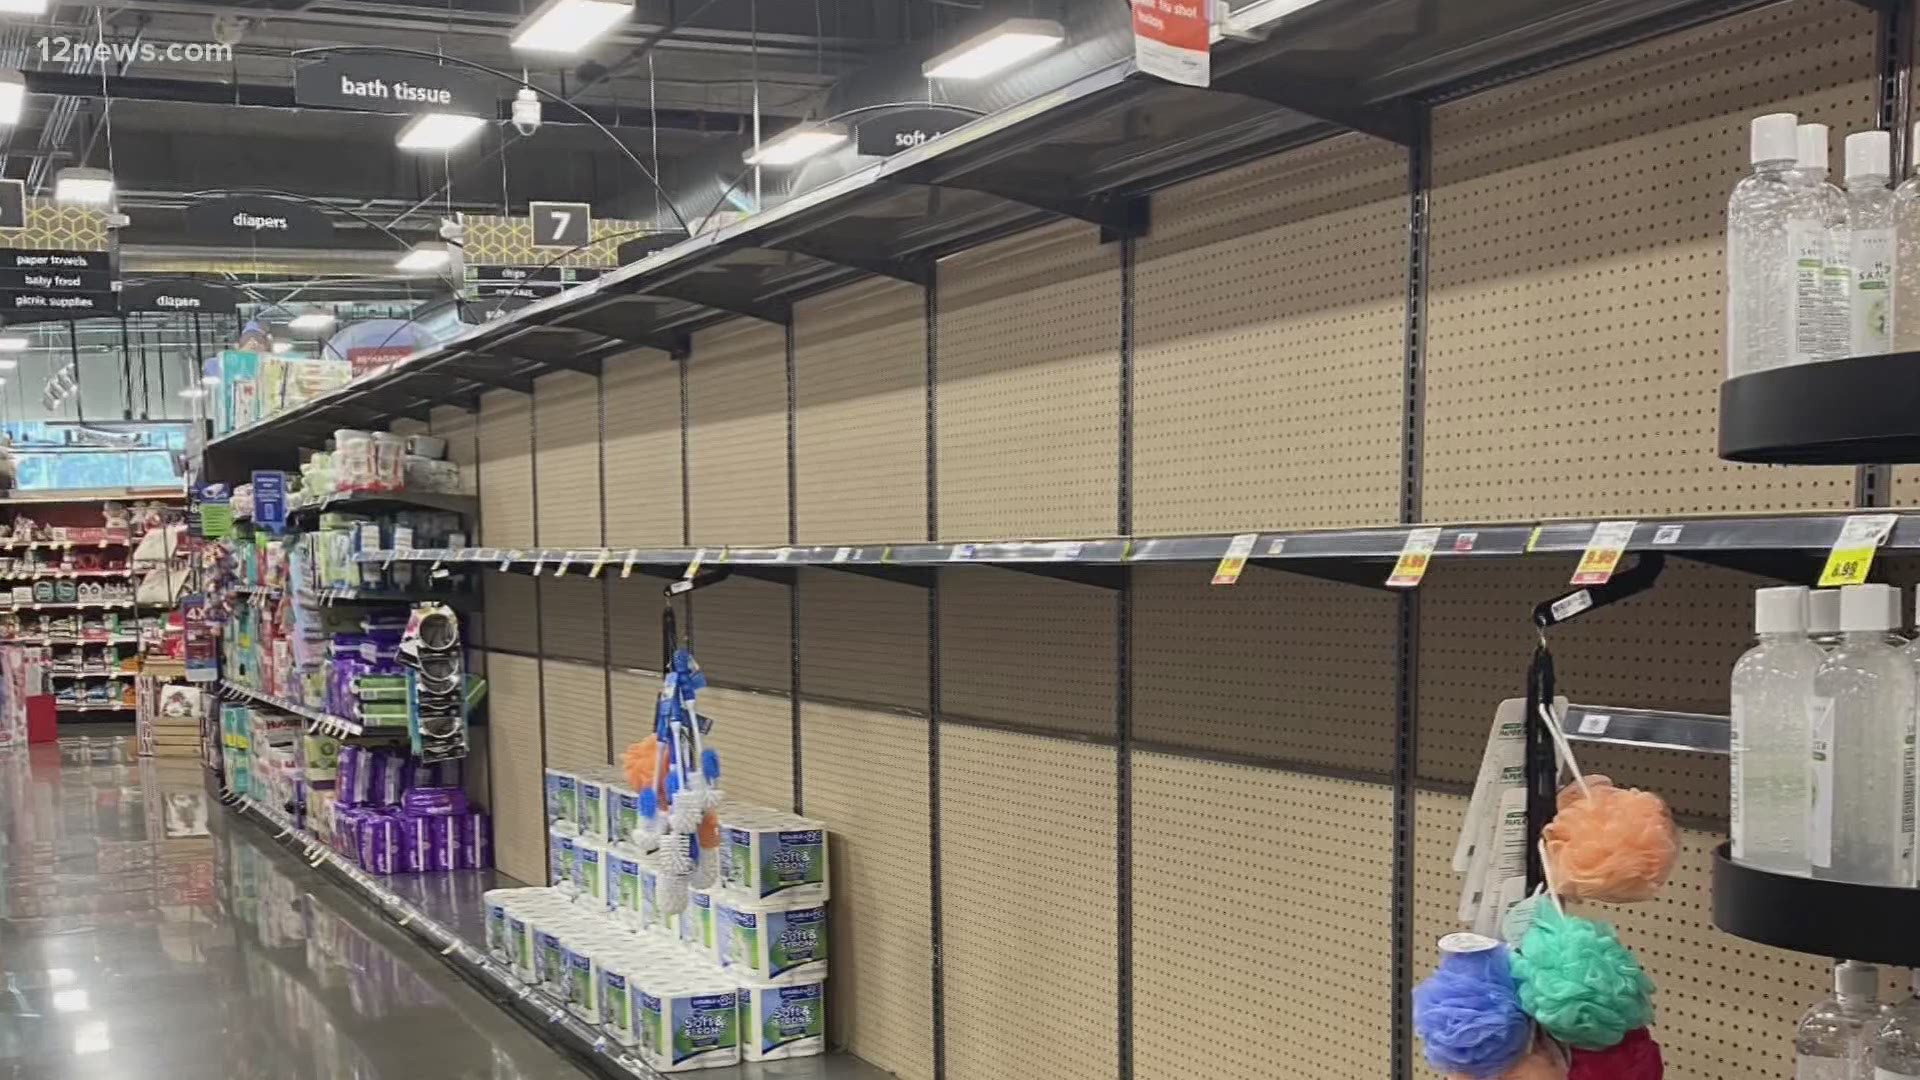 At the beginning of the pandemic supplies like paper products, cleaning supplies and food were difficult to find. Months later, store shelves are going bare again.